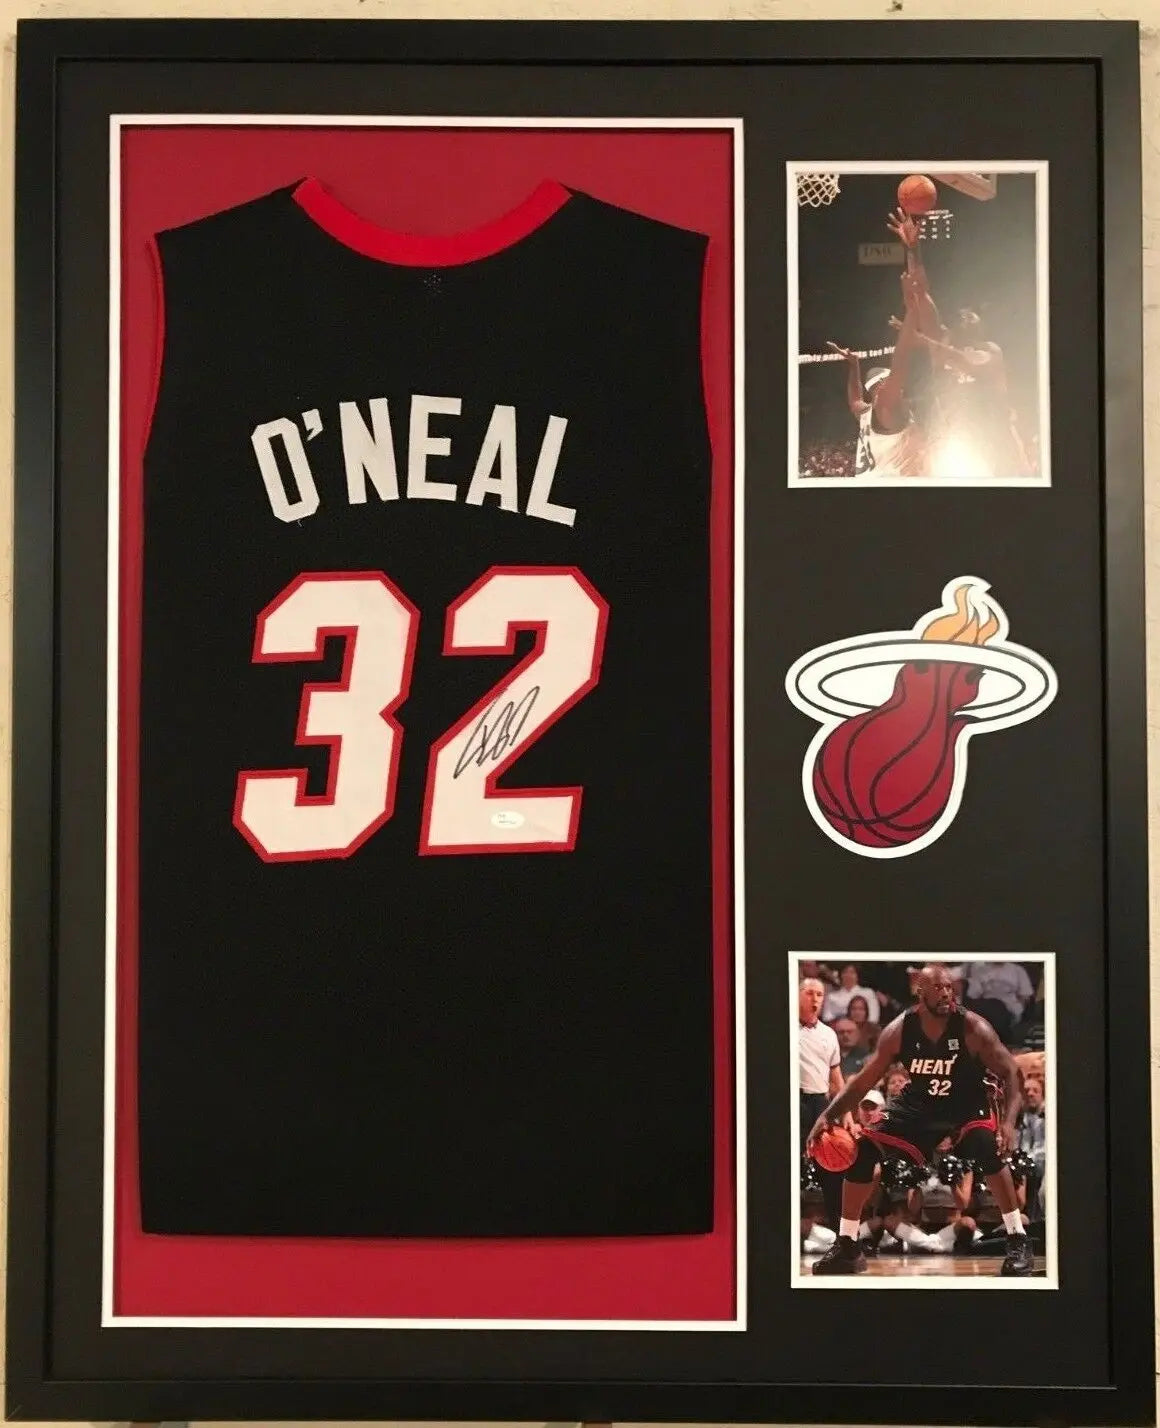 Framed Miami Heat Shaquille O'neal Autographed Signed Jersey Jsa Coa